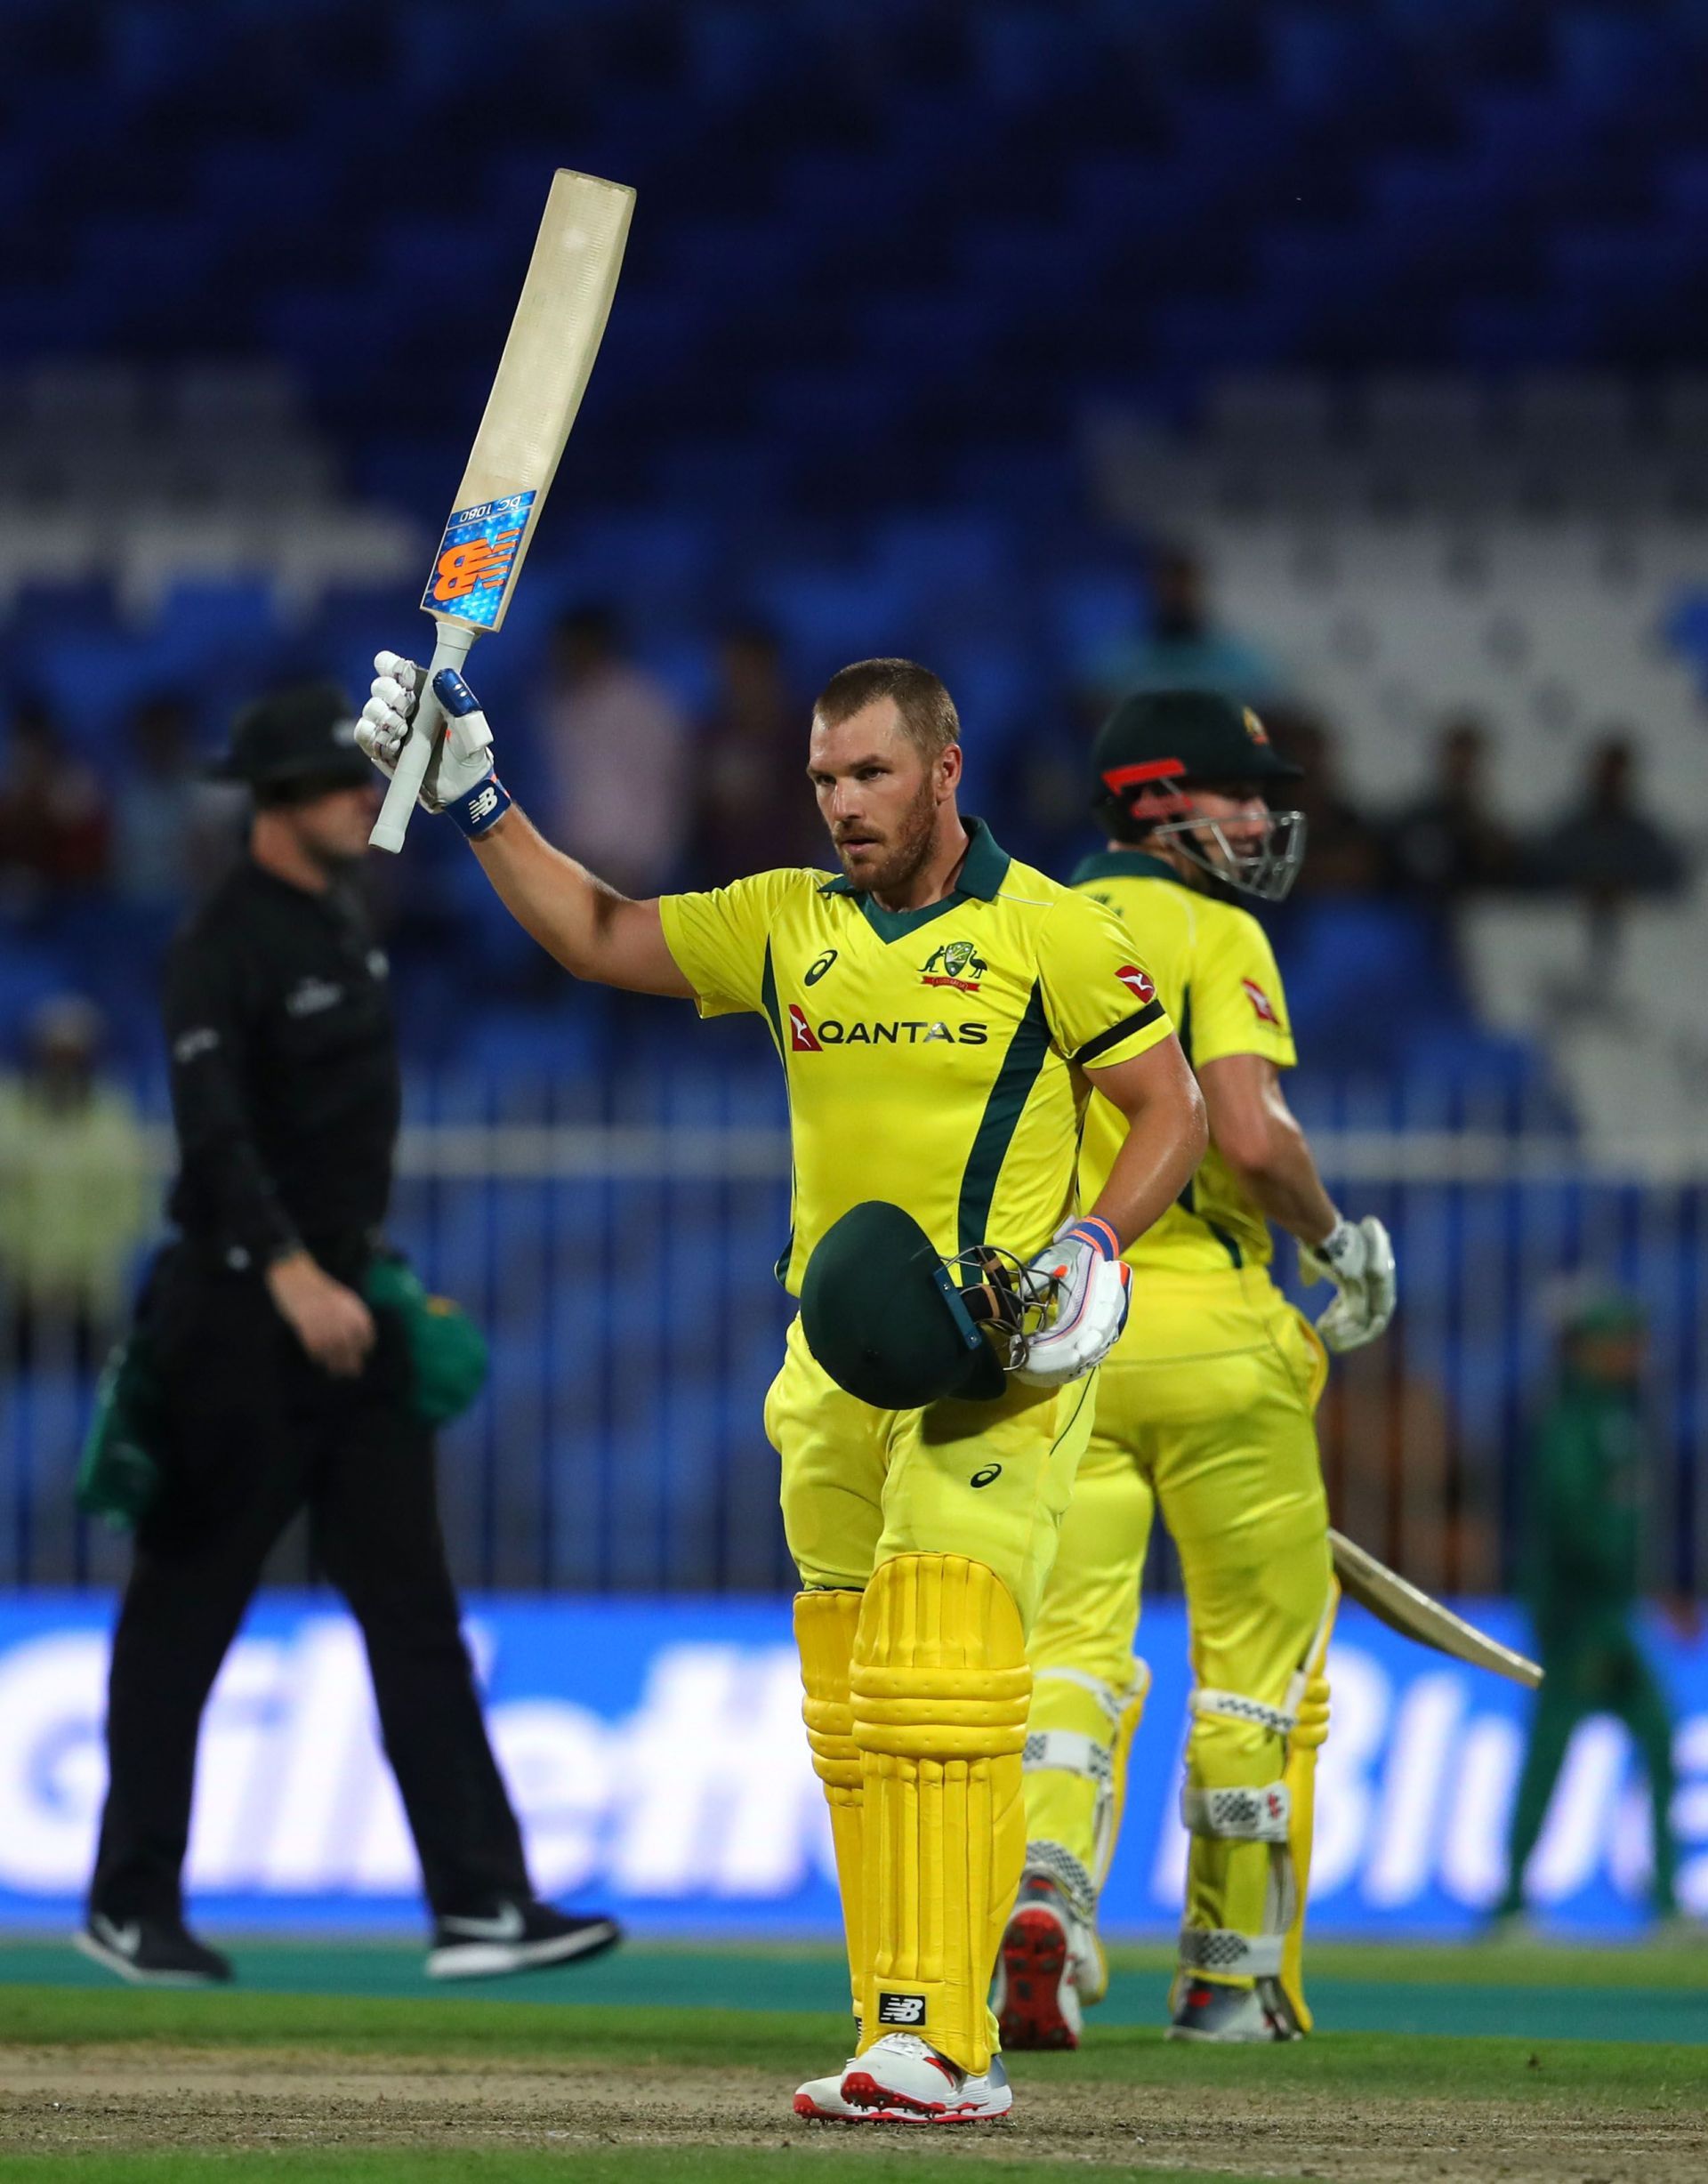 Aaron Finch rose to the occasion during the 2019 ODI series in UAE against Pakistan